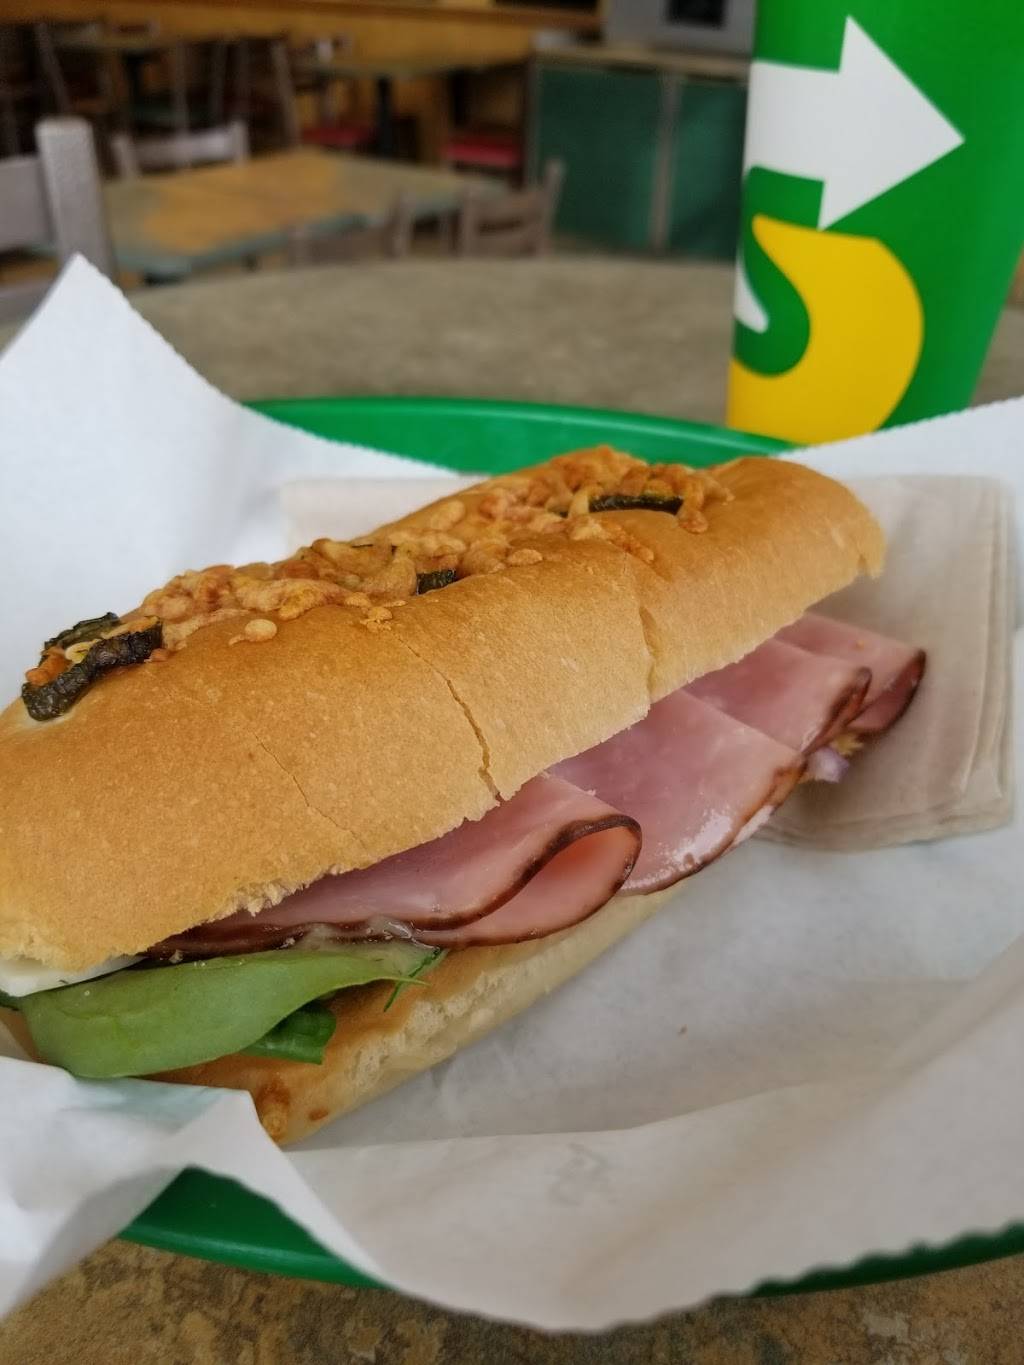 Subway | meal takeaway | 3255 St Rose Parkway Suite 100 Retail 4, Henderson, NV 89052, USA | 7022604132 OR +1 702-260-4132